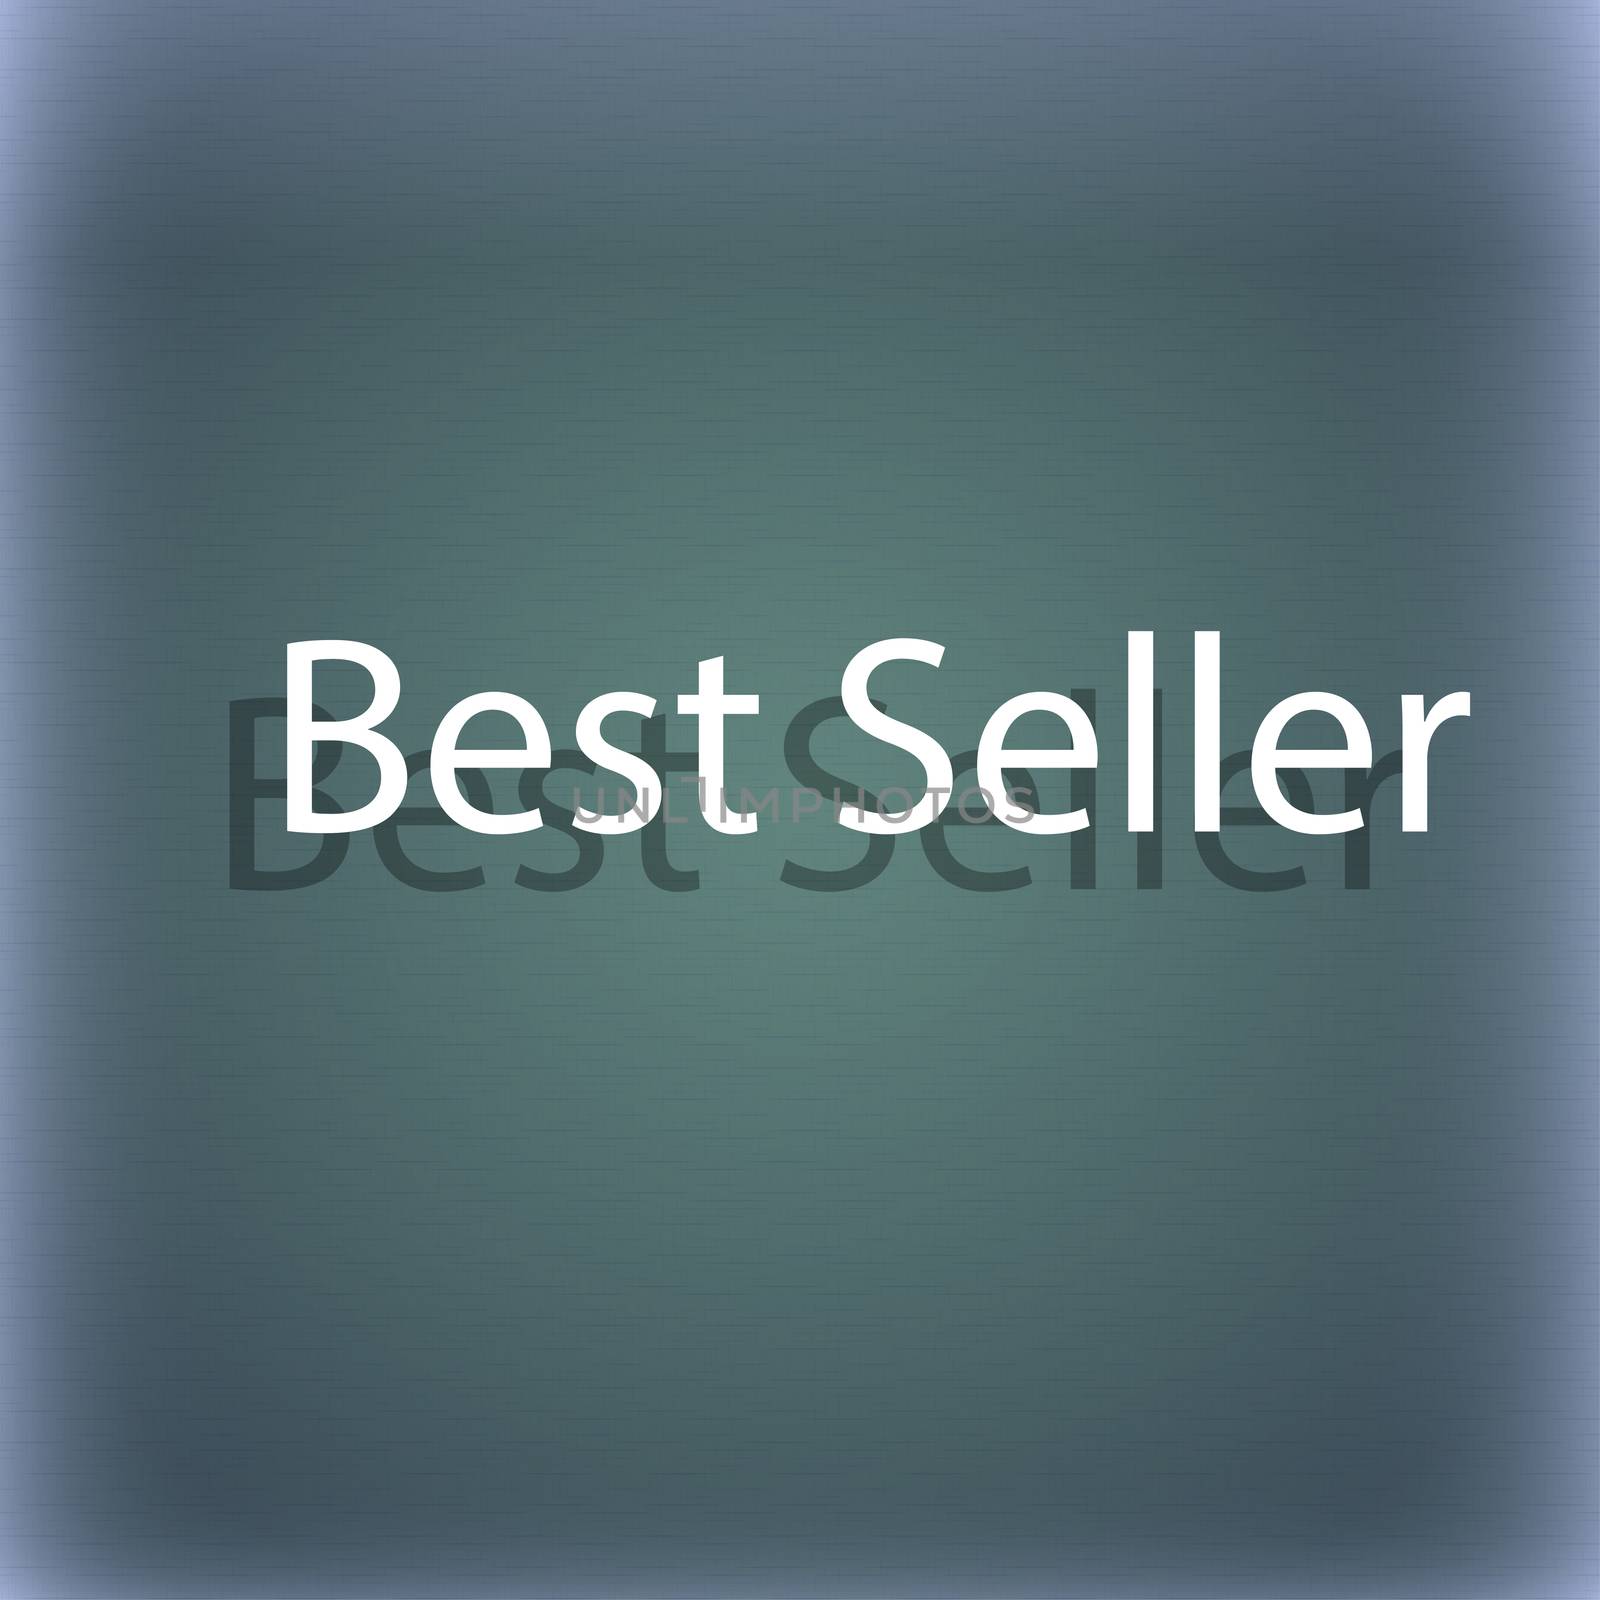 Best seller sign icon. Best-seller award symbol. On the blue-green abstract background with shadow and space for your text.  by serhii_lohvyniuk